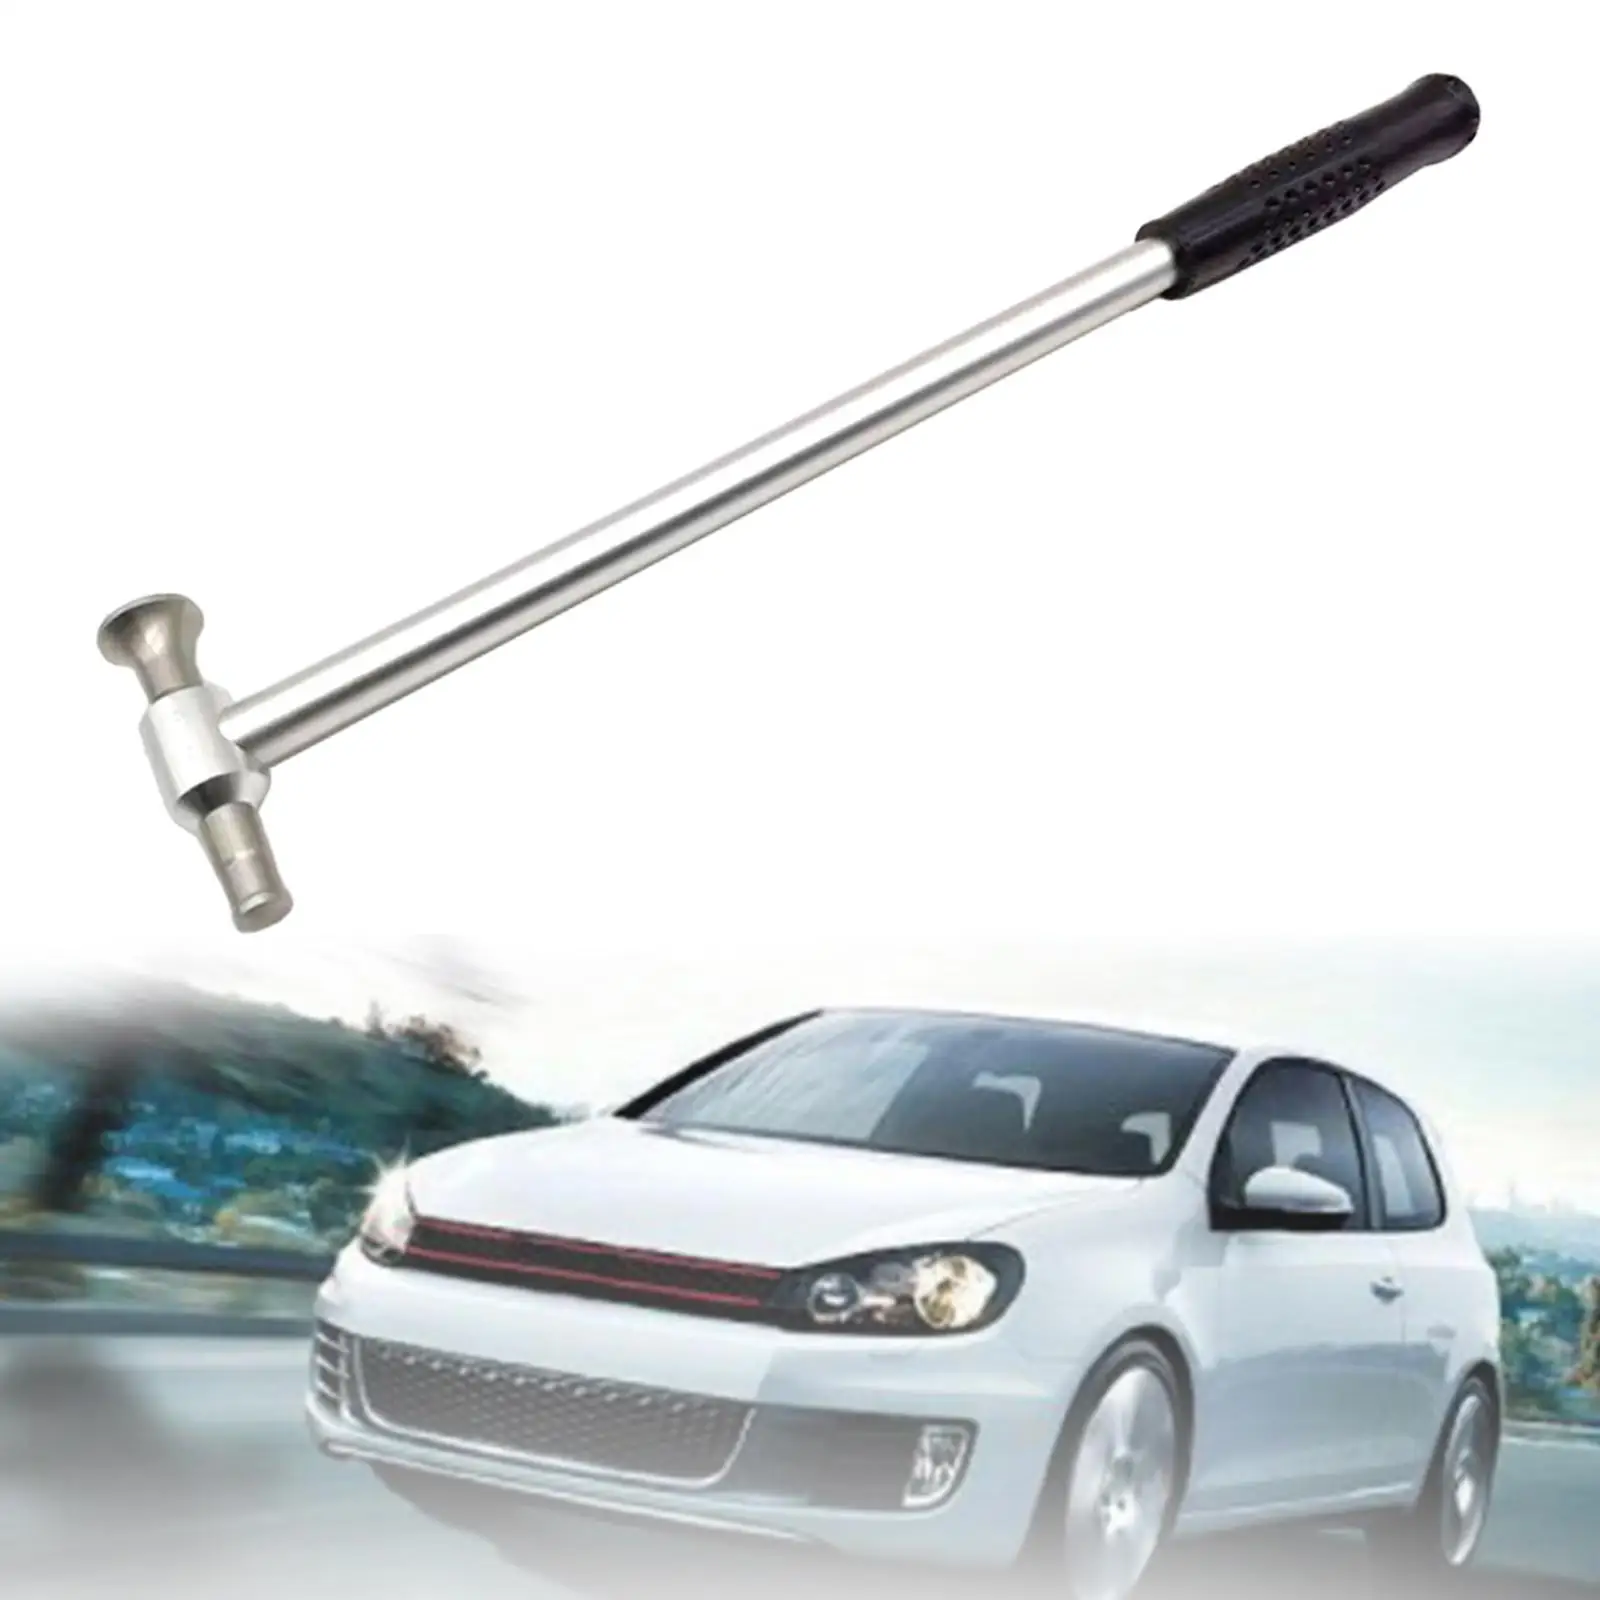 Dent Puller Car Dent Repair Tool for Metal Surface Dent Removal Washing Machines Motorcycles Car Auto Body Car Dent Repair